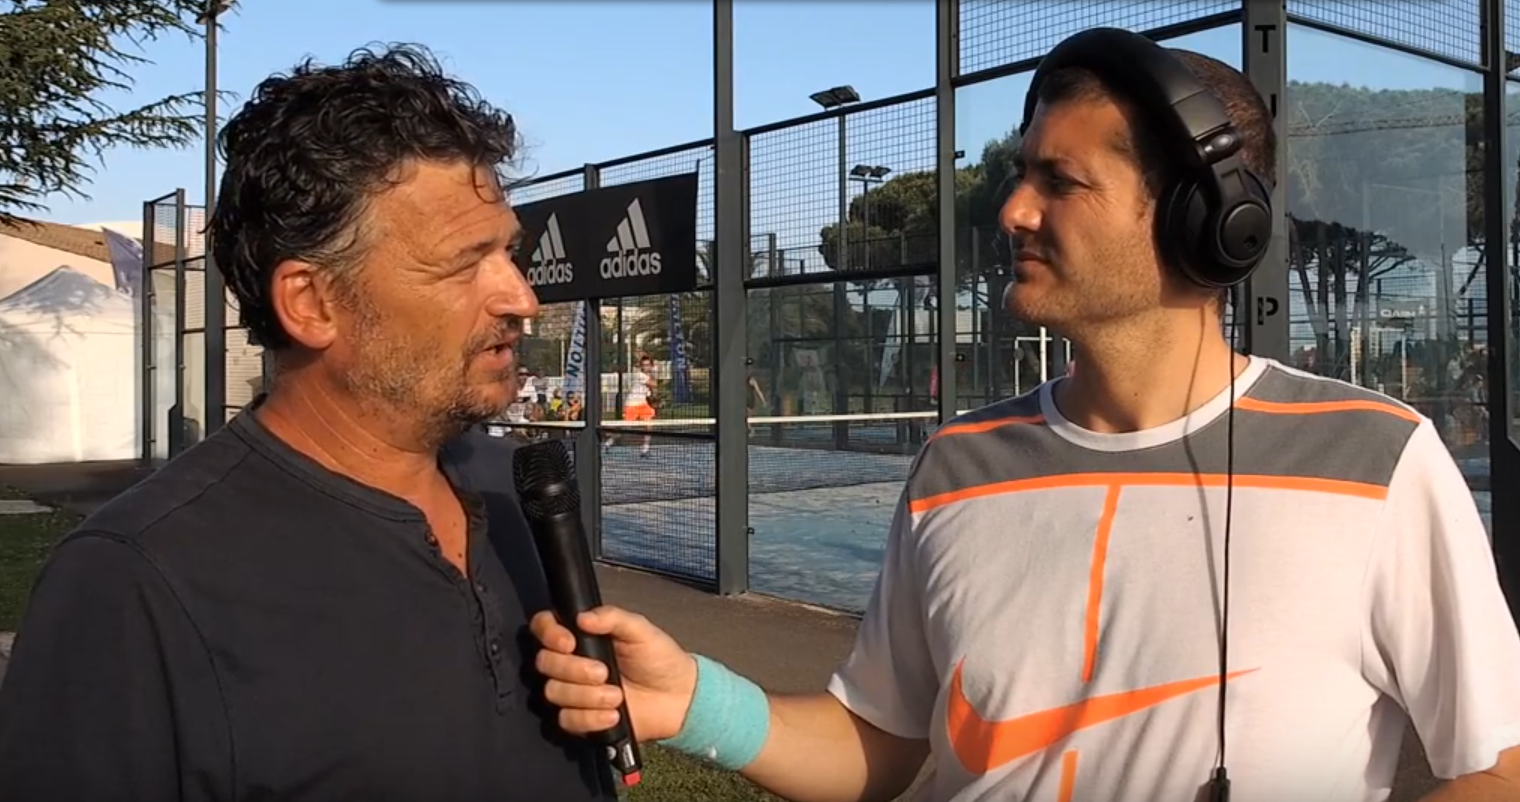 Alain Henry: “We are going to cover padel"